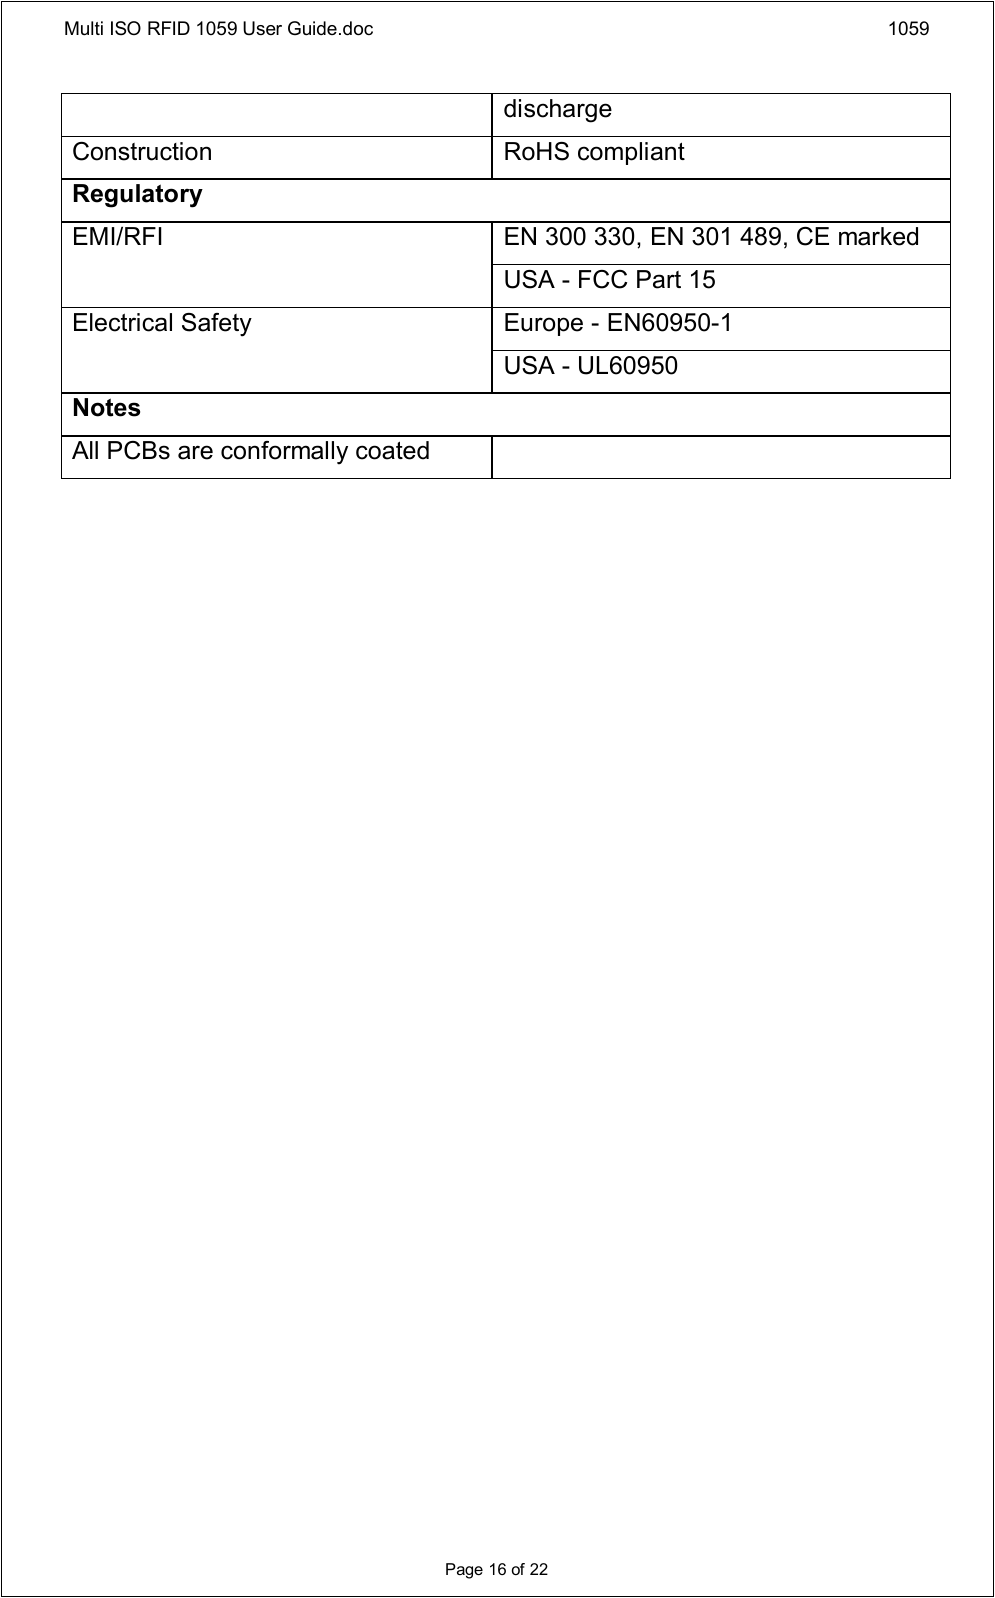 Multi ISO RFID 1059 User Guide.doc 1059Page 16 of 22dischargeConstruction RoHS compliantRegulatoryEN 300 330, EN 301 489, CE markedEMI/RFIUSA - FCC Part 15Europe - EN60950-1Electrical SafetyUSA - UL60950NotesAll PCBs are conformally coated